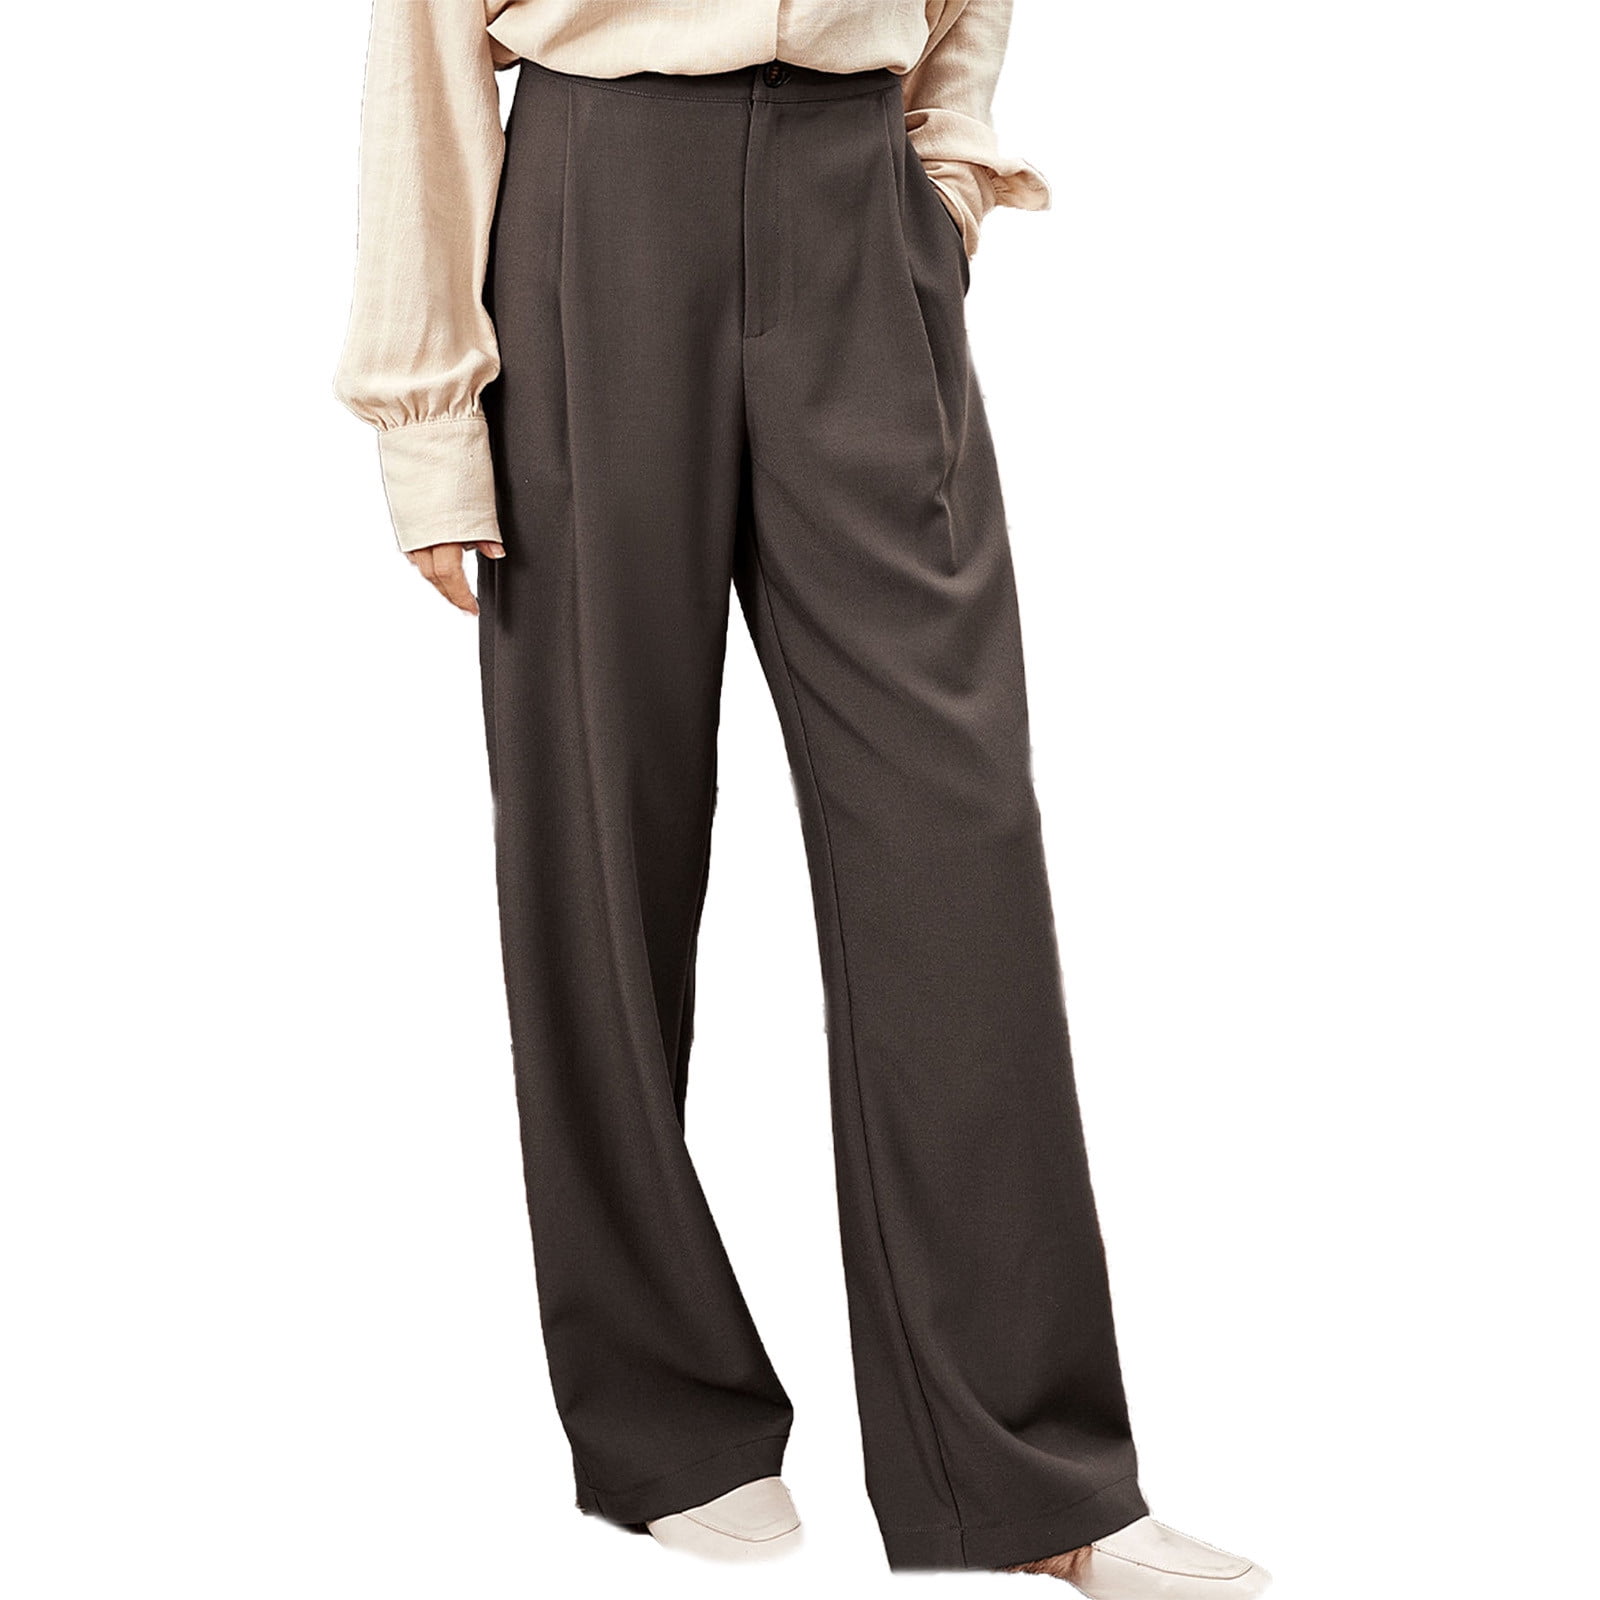 Brglopf Women's Dress Pants High Waist Pull-on Stretchy Pants Solid Color  Straight Wide Leg Slacks with Pockets for Business Casual 